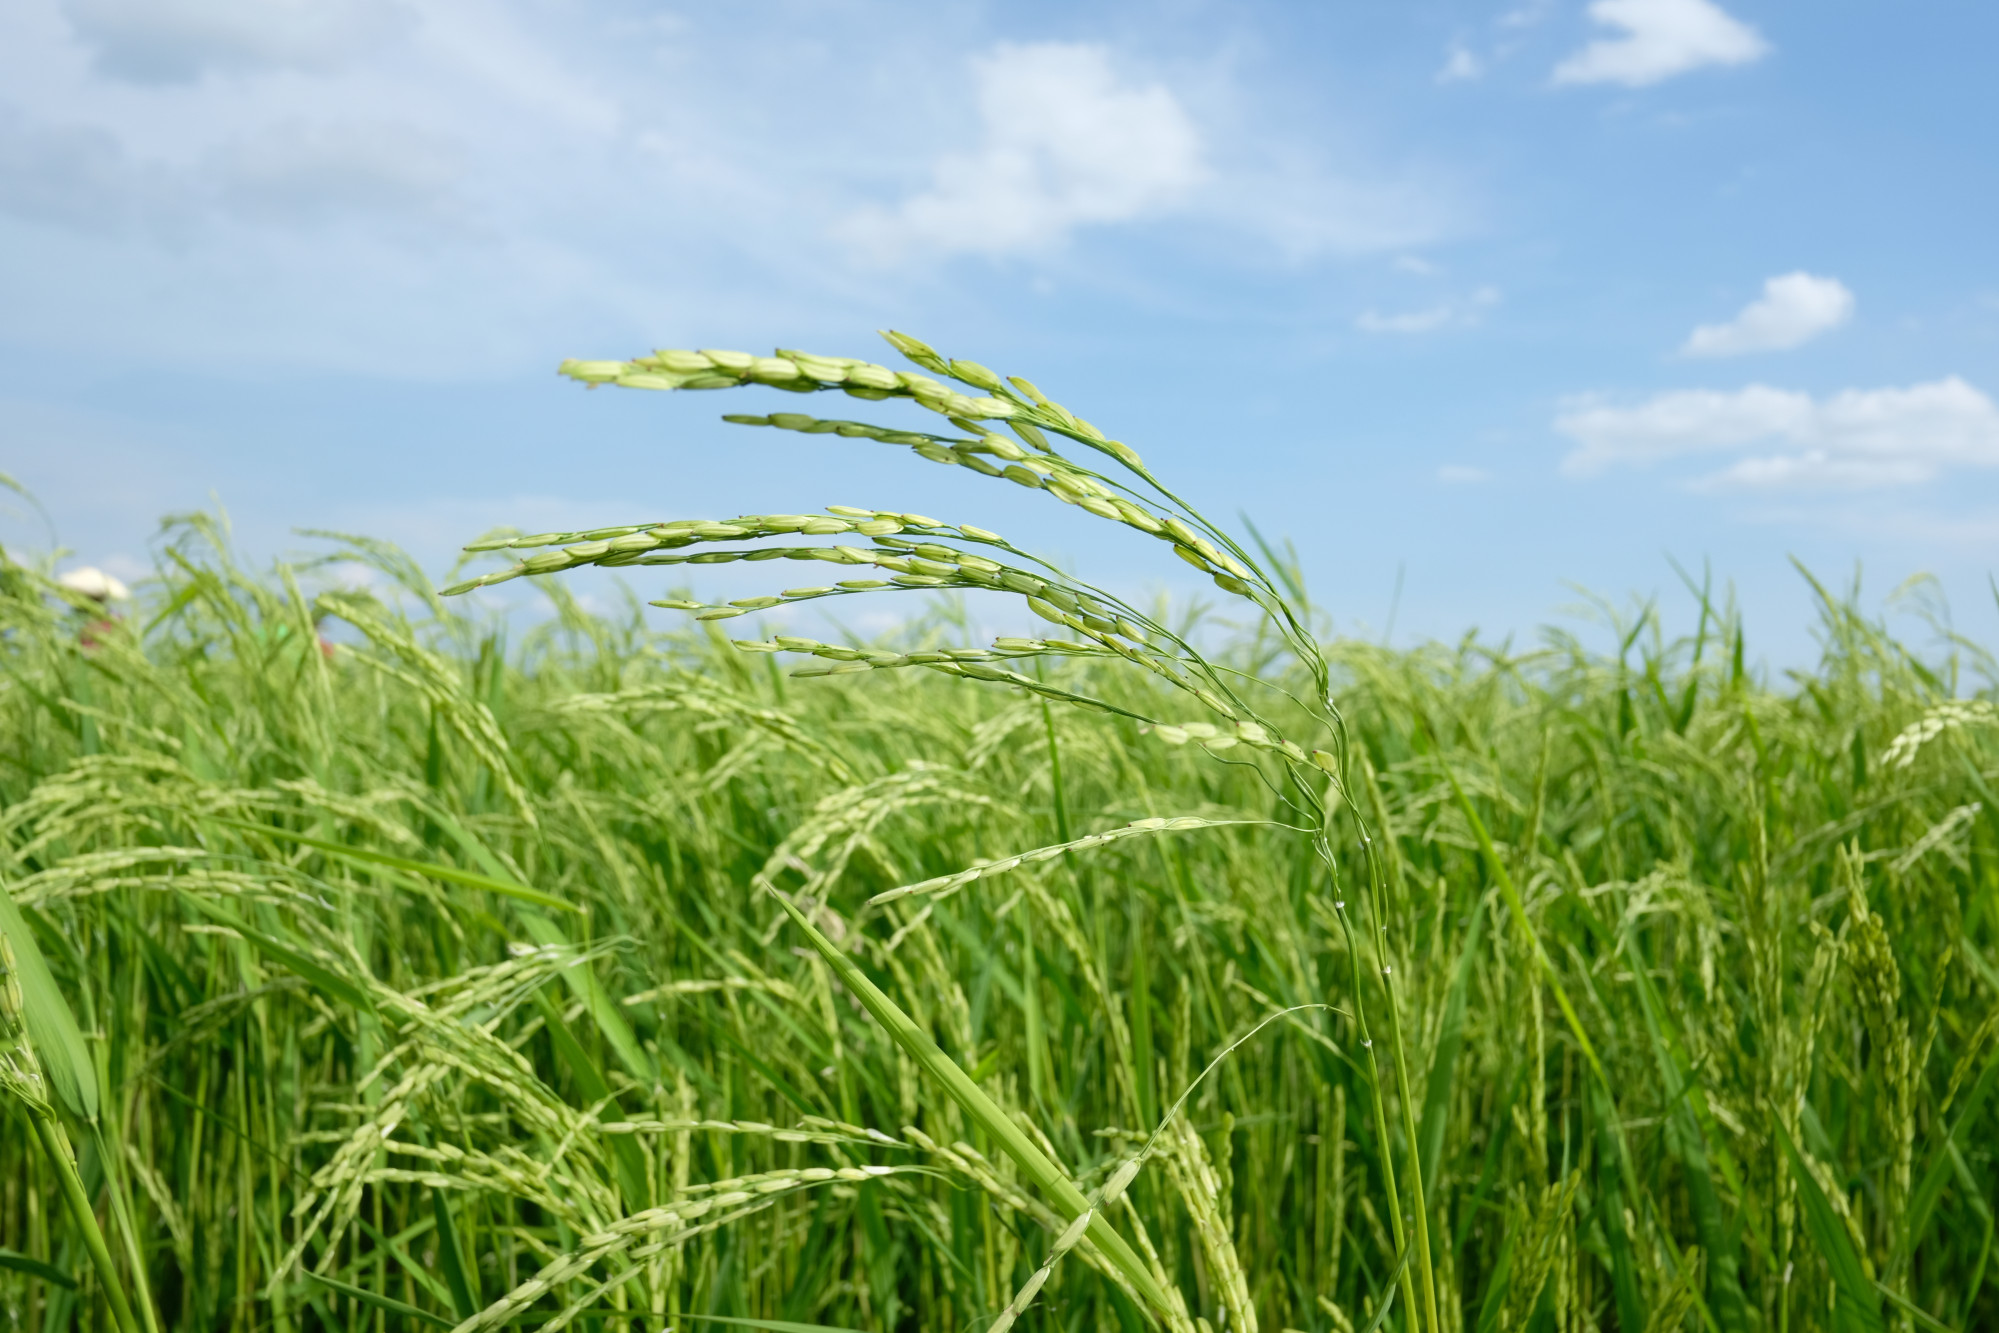 The study involved two long-term experiments to evaluate the effect of elevated carbon dioxide on phosphorus levels in rice paddy fields. Photo: Shutterstock